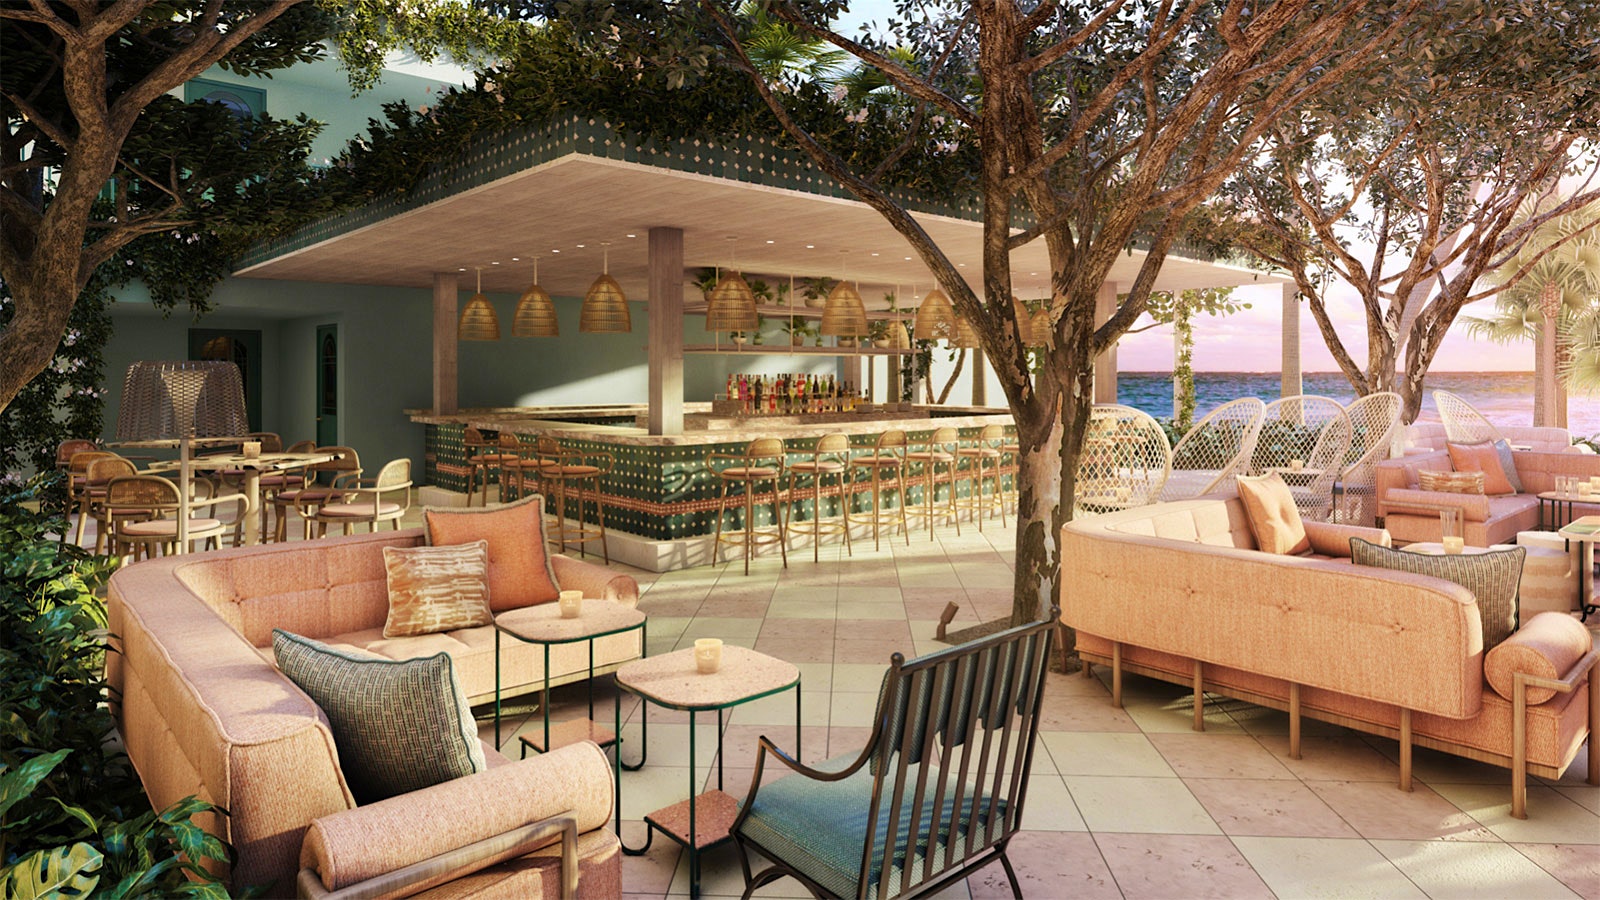  The planned waterfront deck of Casadonna, with a bar and couch seating overlooking Biscayne Bay